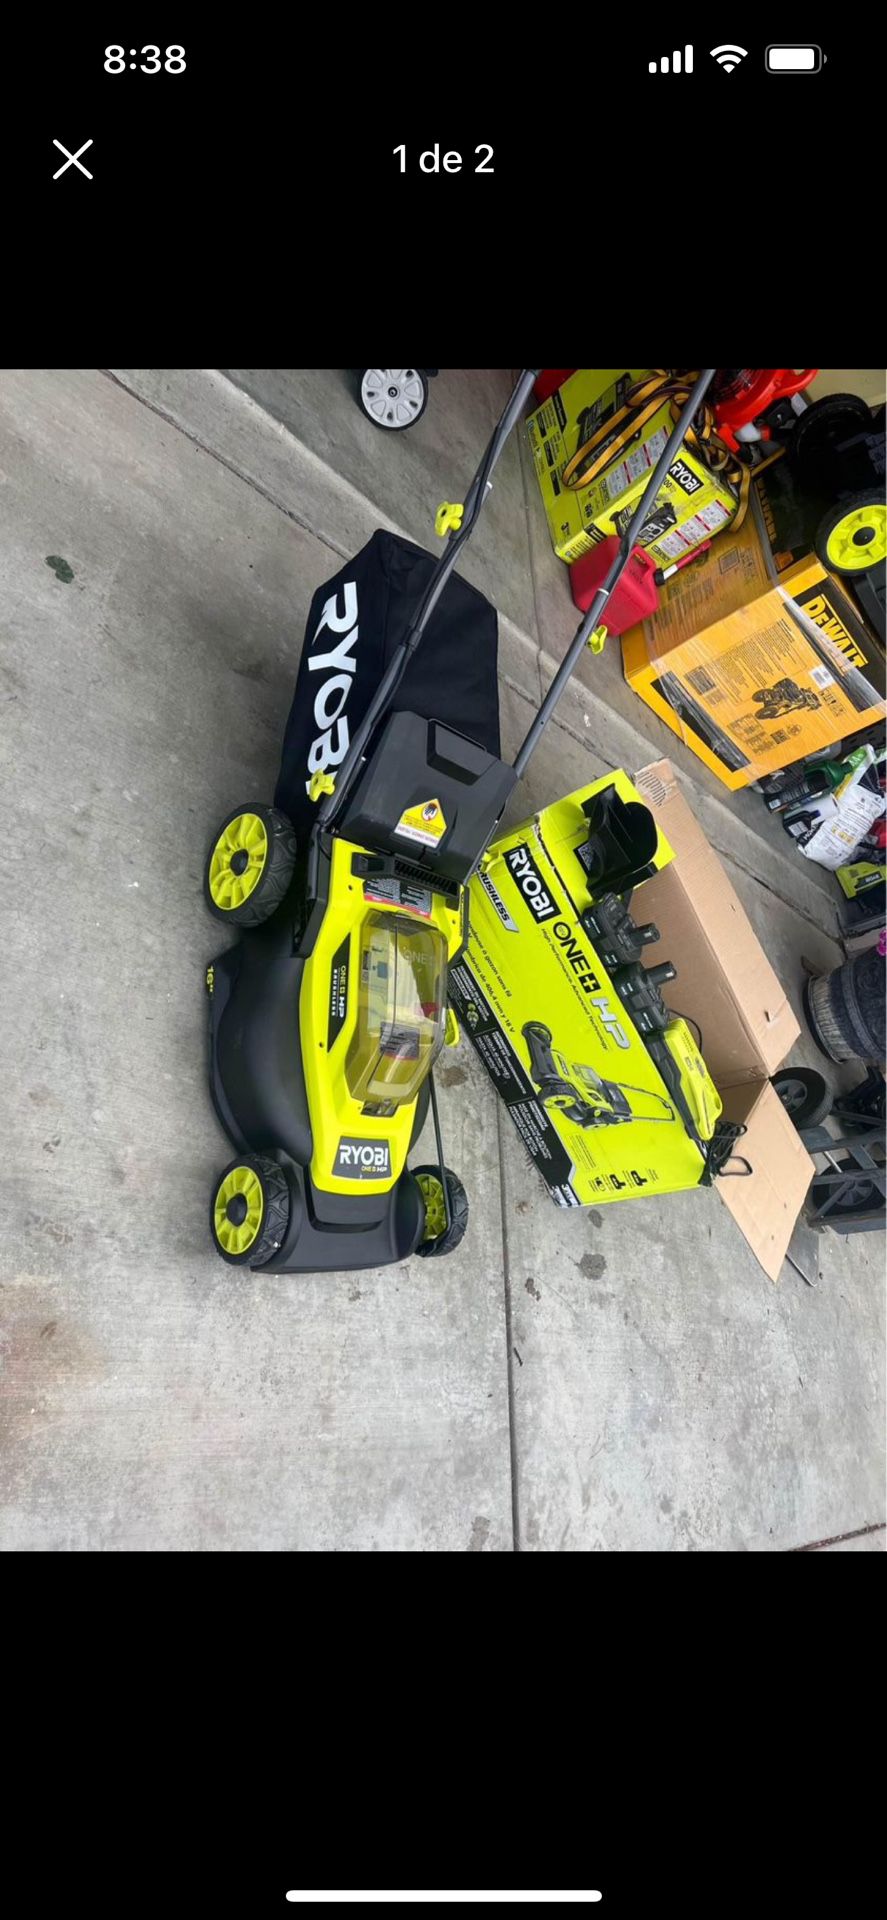 RYOBI ONE+ HP 18V Brushless 16 in. Cordless Battery Walk Behind Push Lawn Mower with (1) 4.0 Ah Batteries and (1) Charger